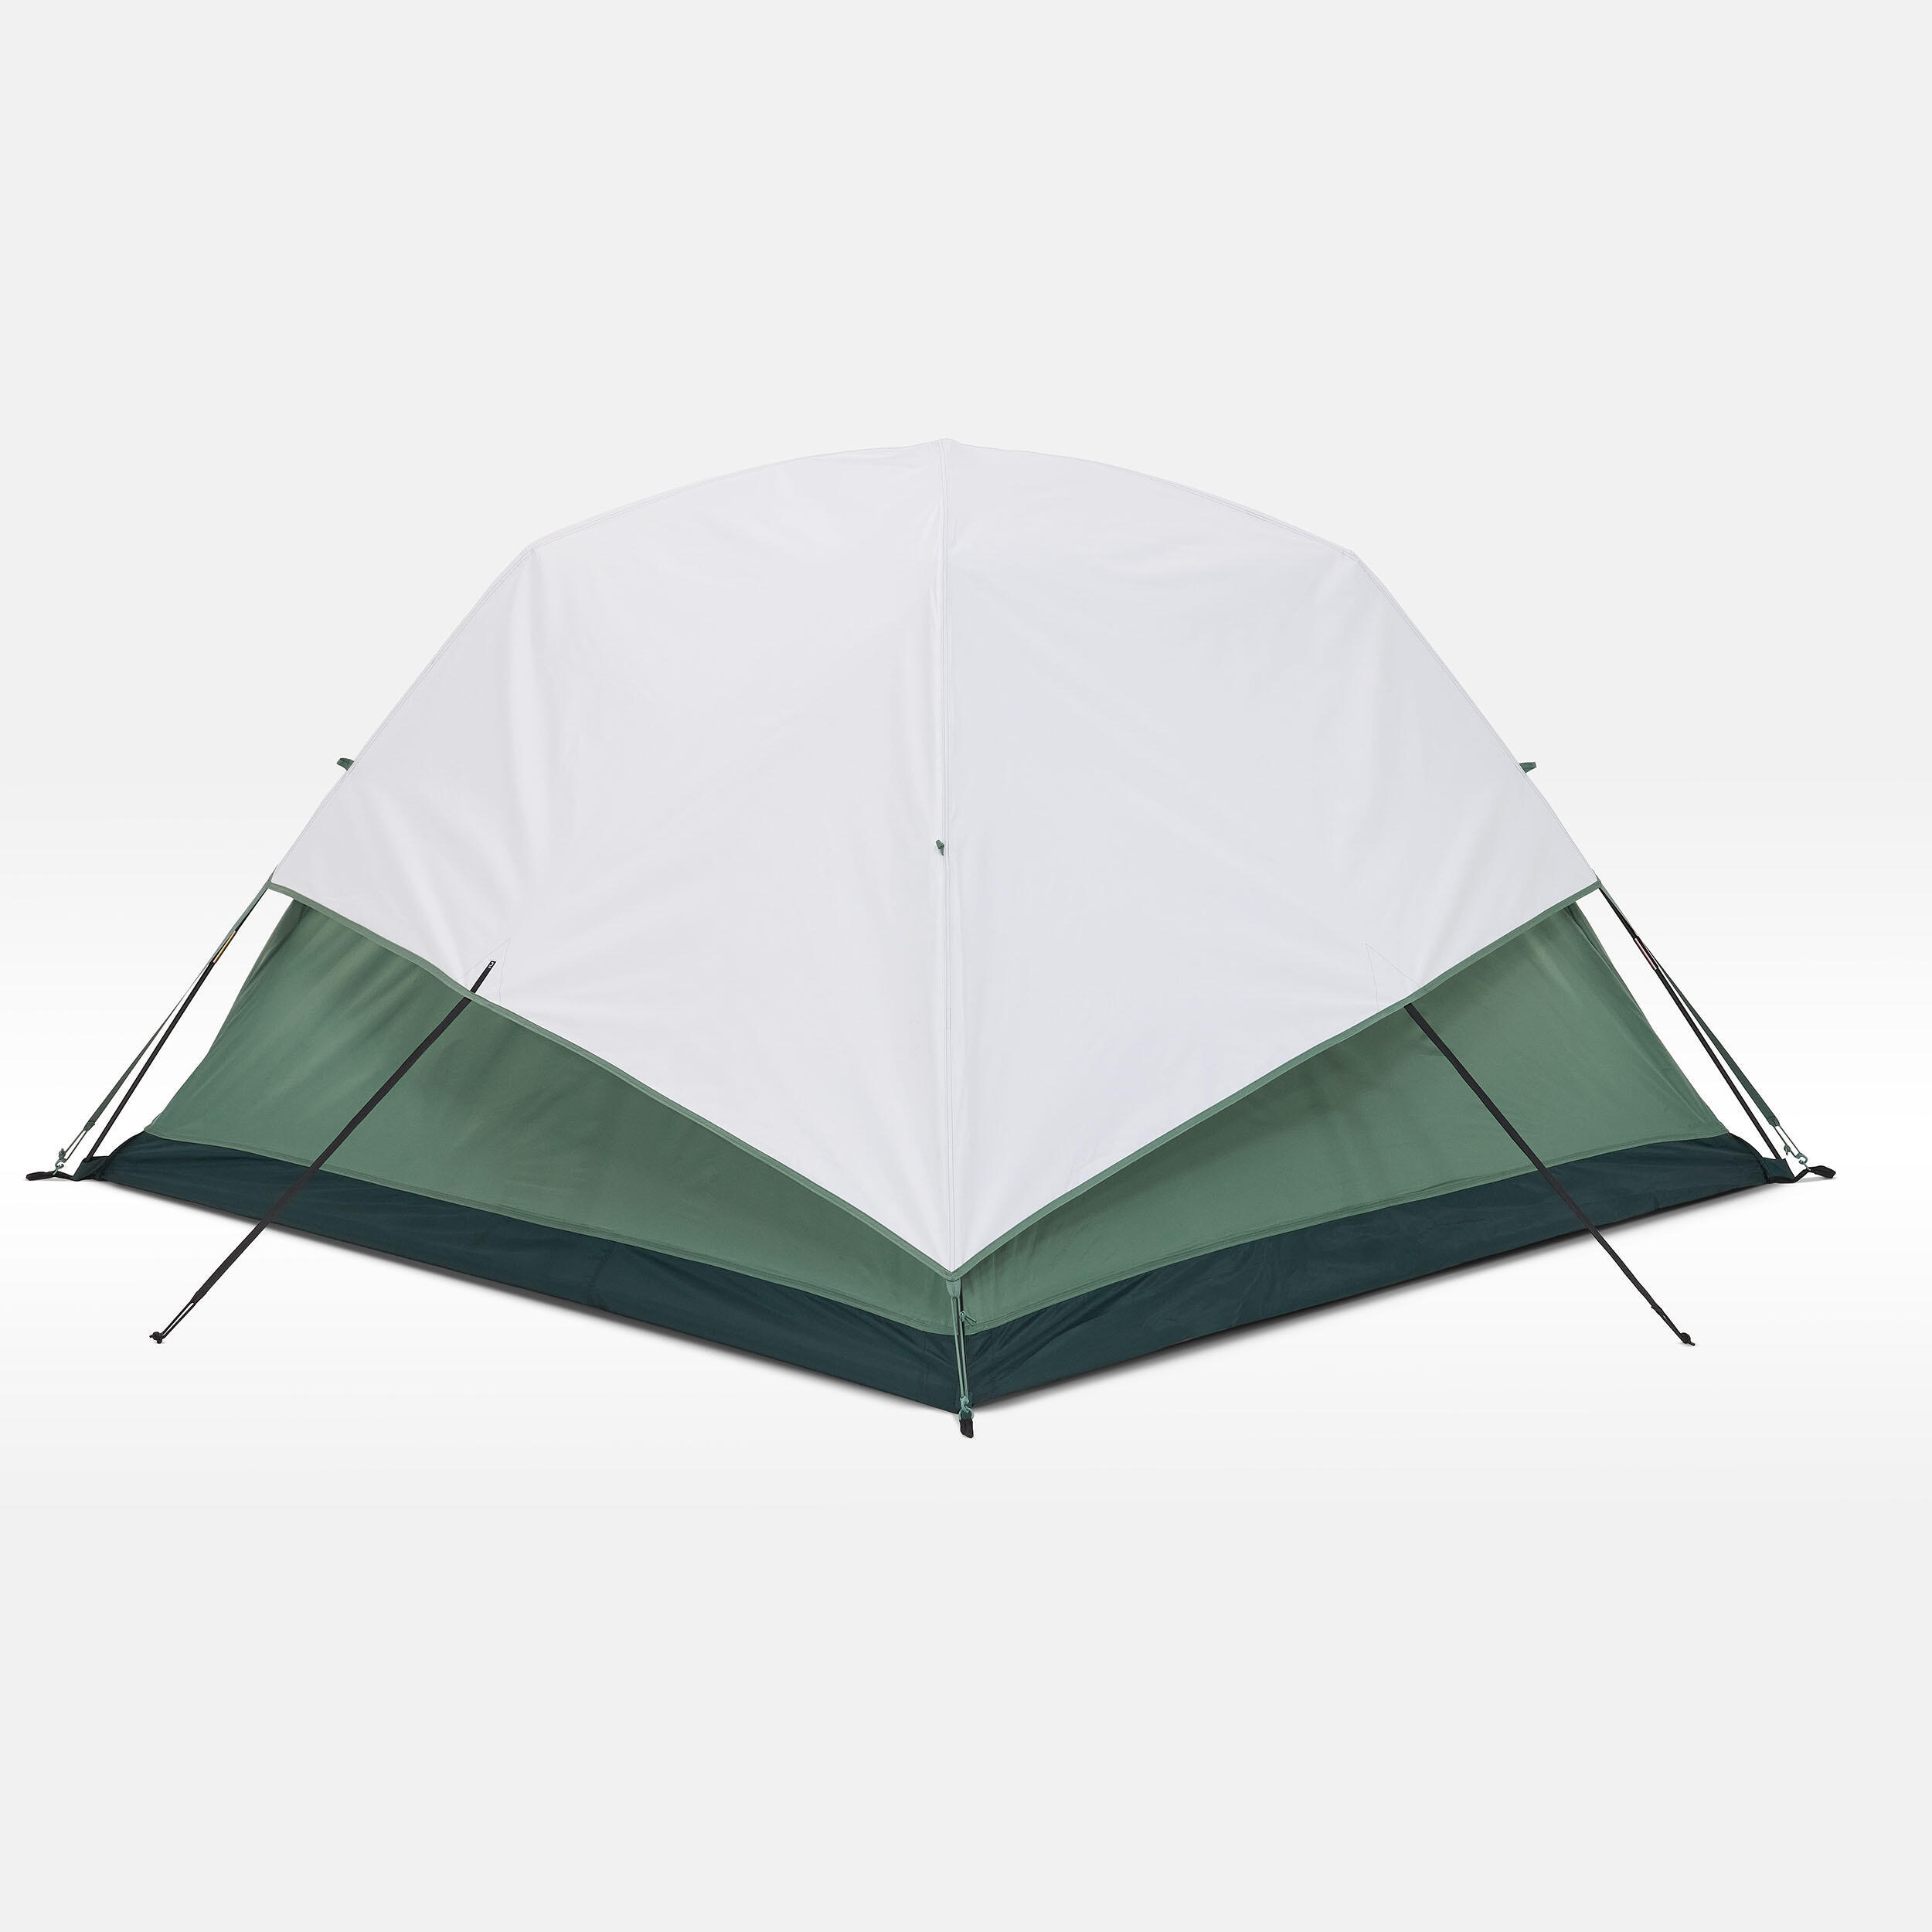 Camping tent - MH100  - 3-person - Fresh 7/24